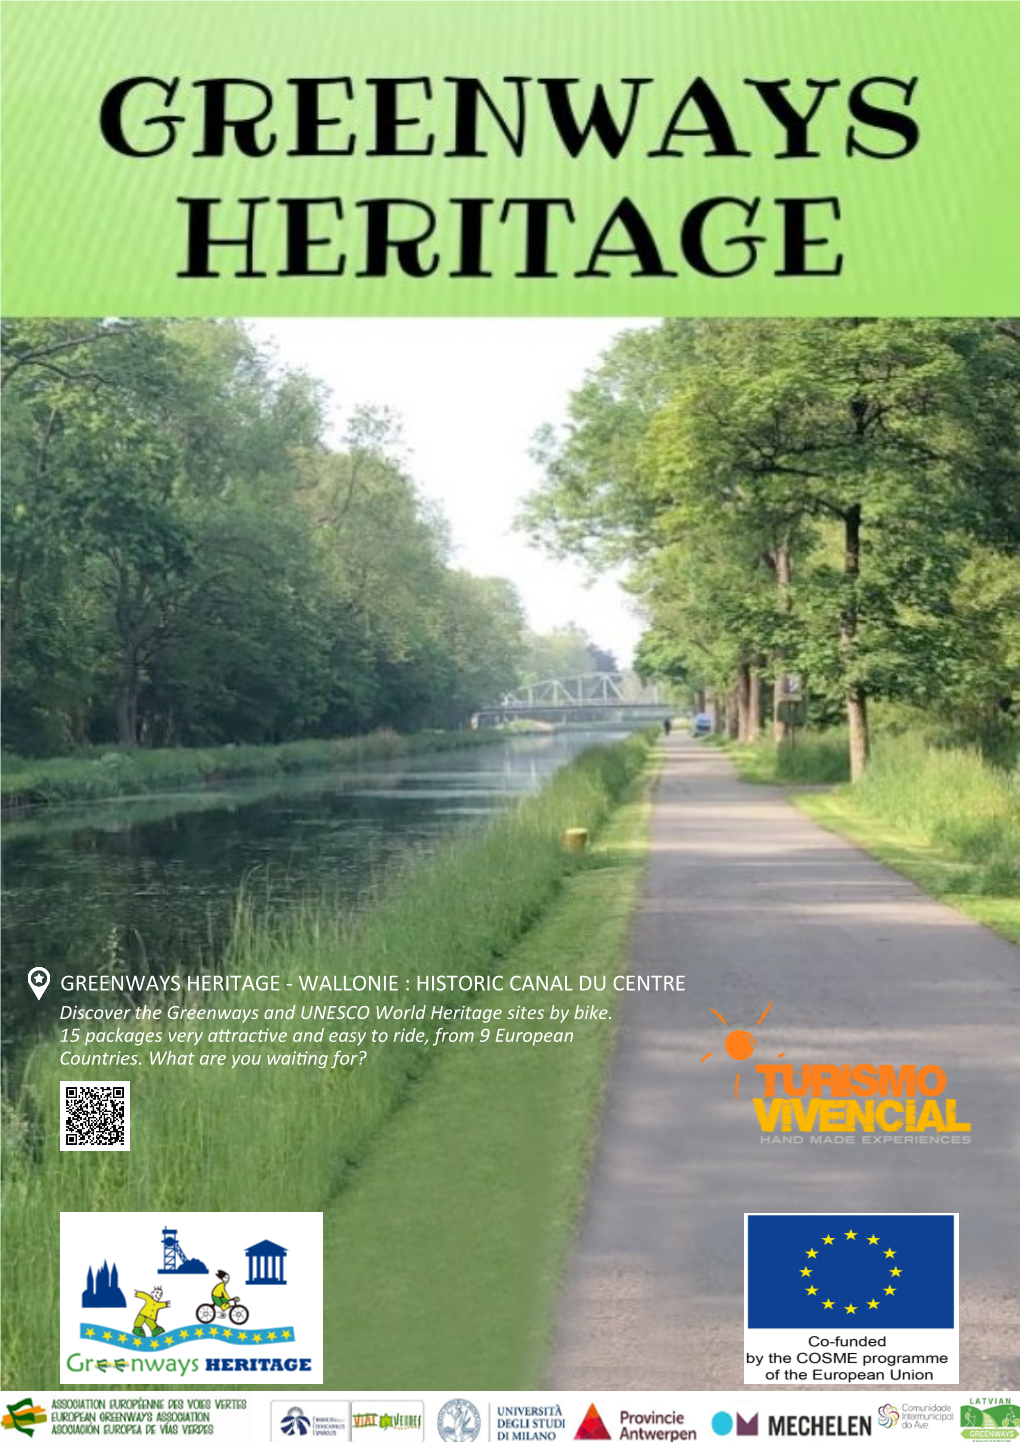 GREENWAYS HERITAGE - WALLONIE : HISTORIC CANAL DU CENTRE Discover the Greenways and UNESCO World Heritage Sites by Bike